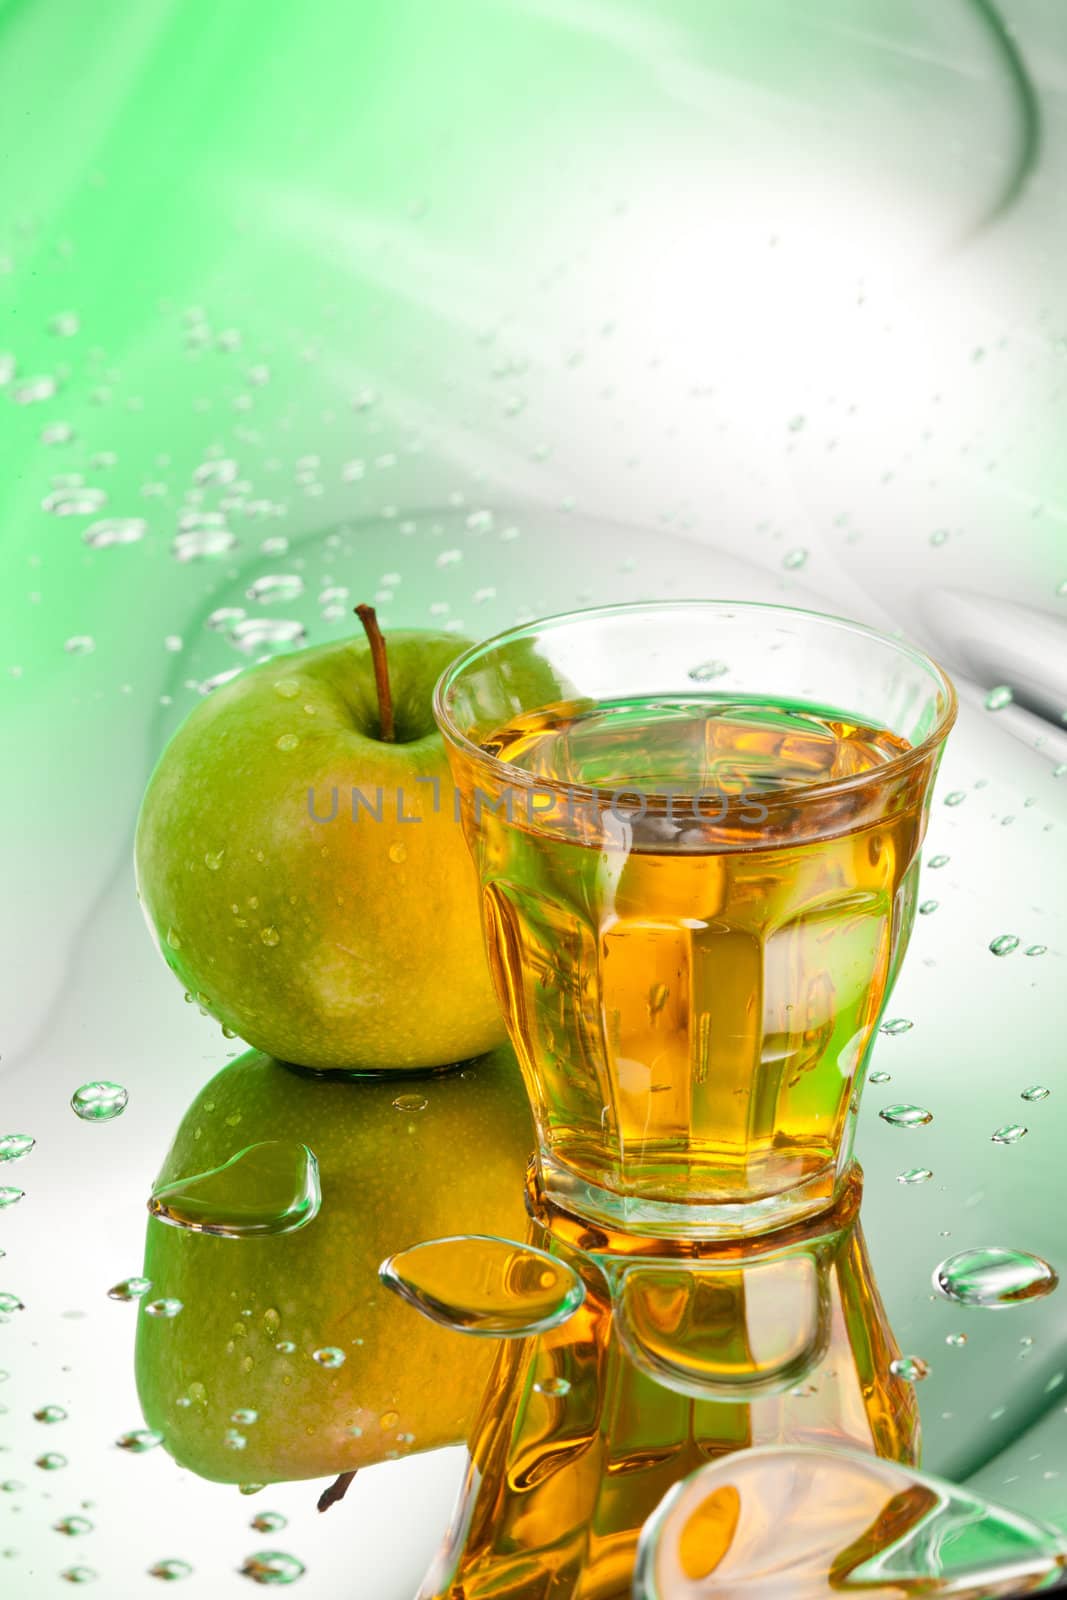 ripe apple and juice on abstract background